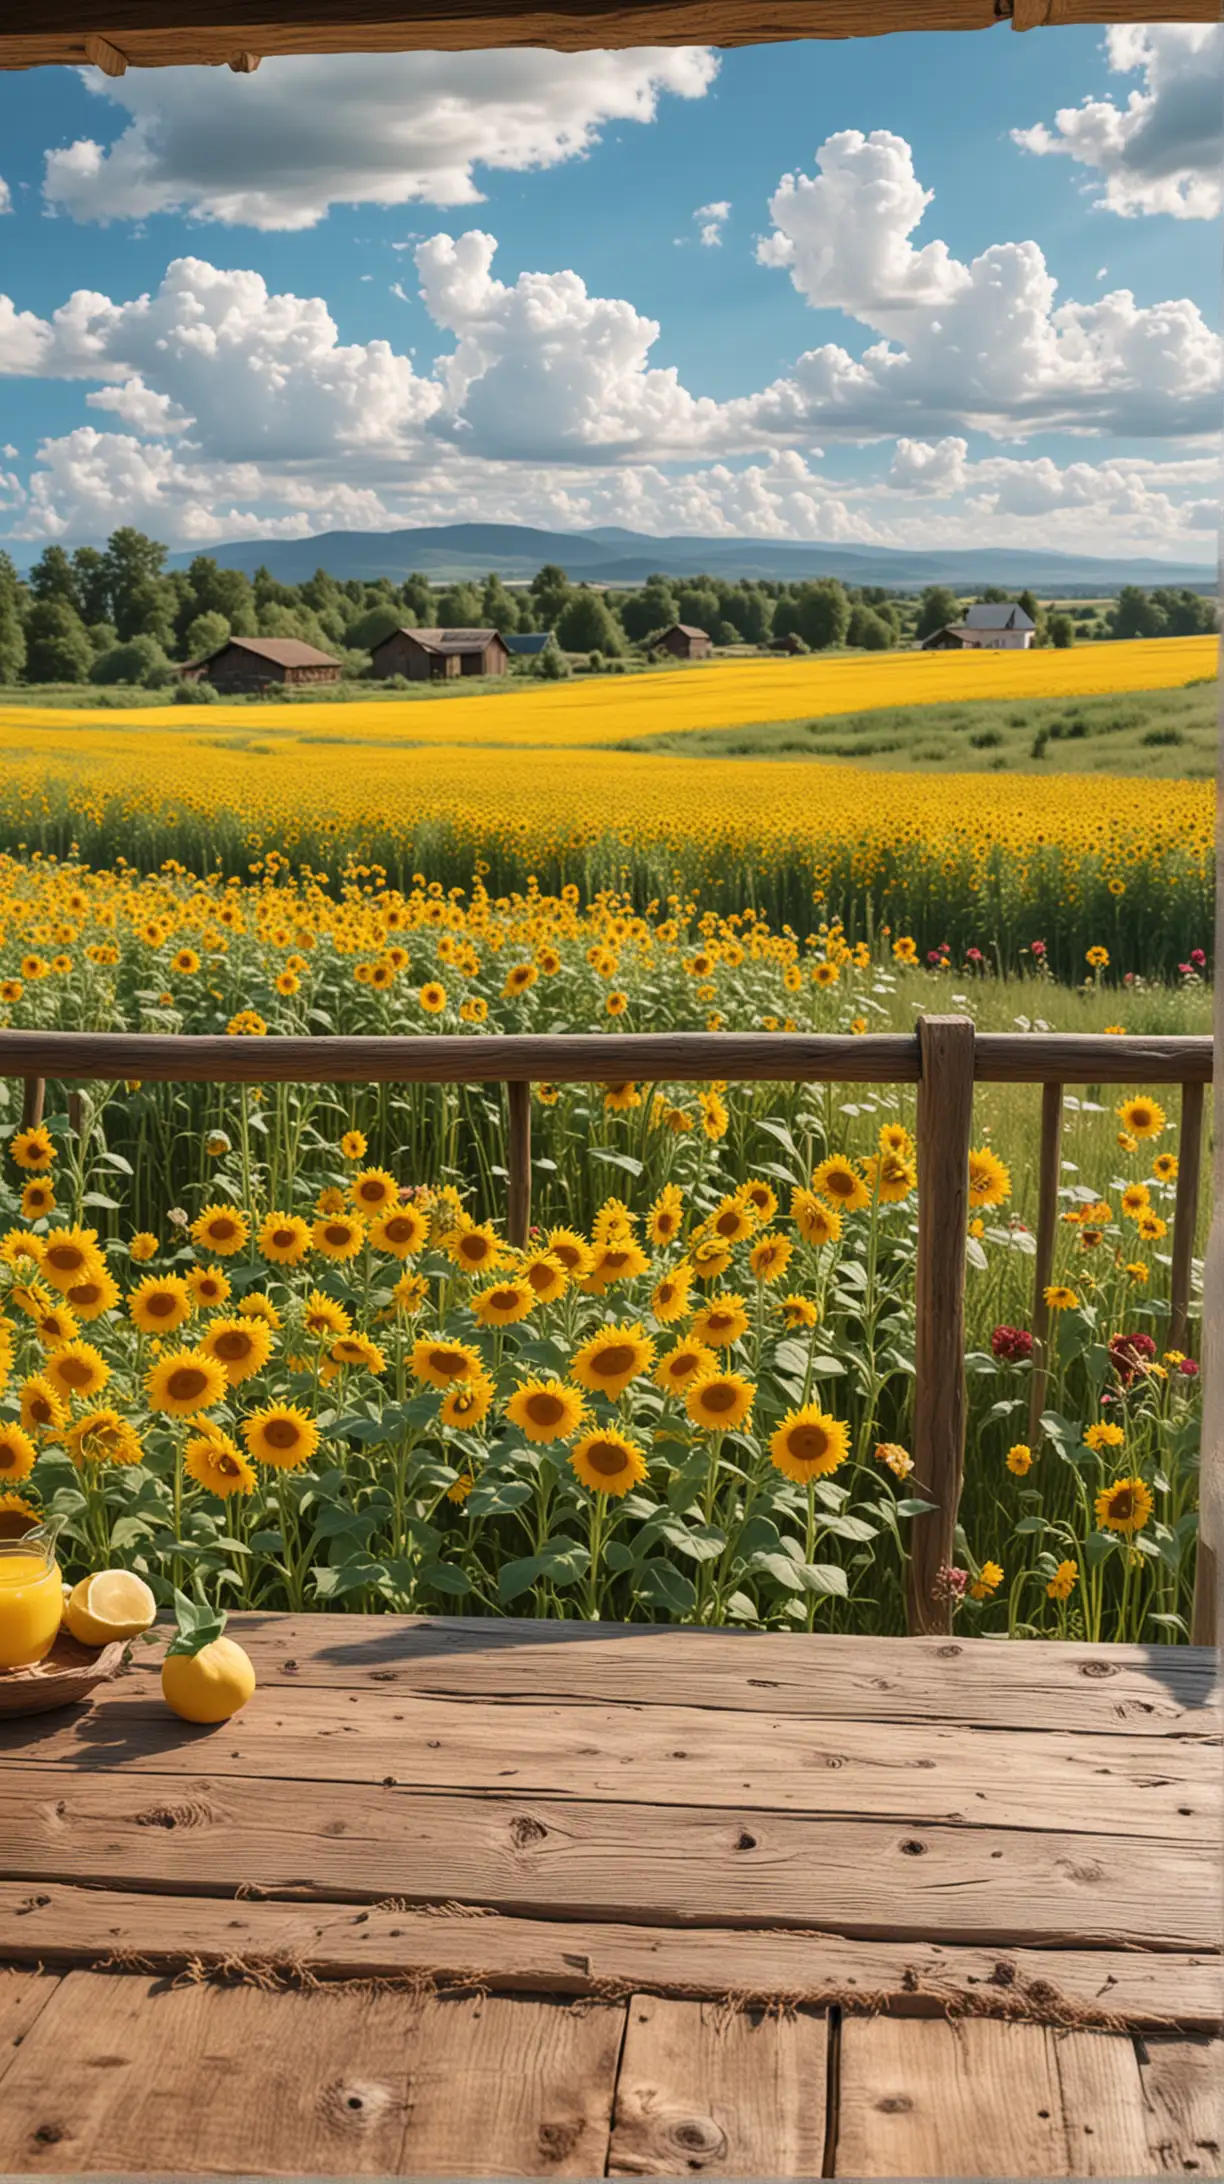 view from balkon hut made of woods and hay roof to meadow full of vibrant variant flowers and sunflowers, Lemonade on wood table, from distance, render 8k, stable diffusion, ultra detailed, acrylic palette colors, realistic, illustration, photography style, beautiful sky and fluffy clouds,

